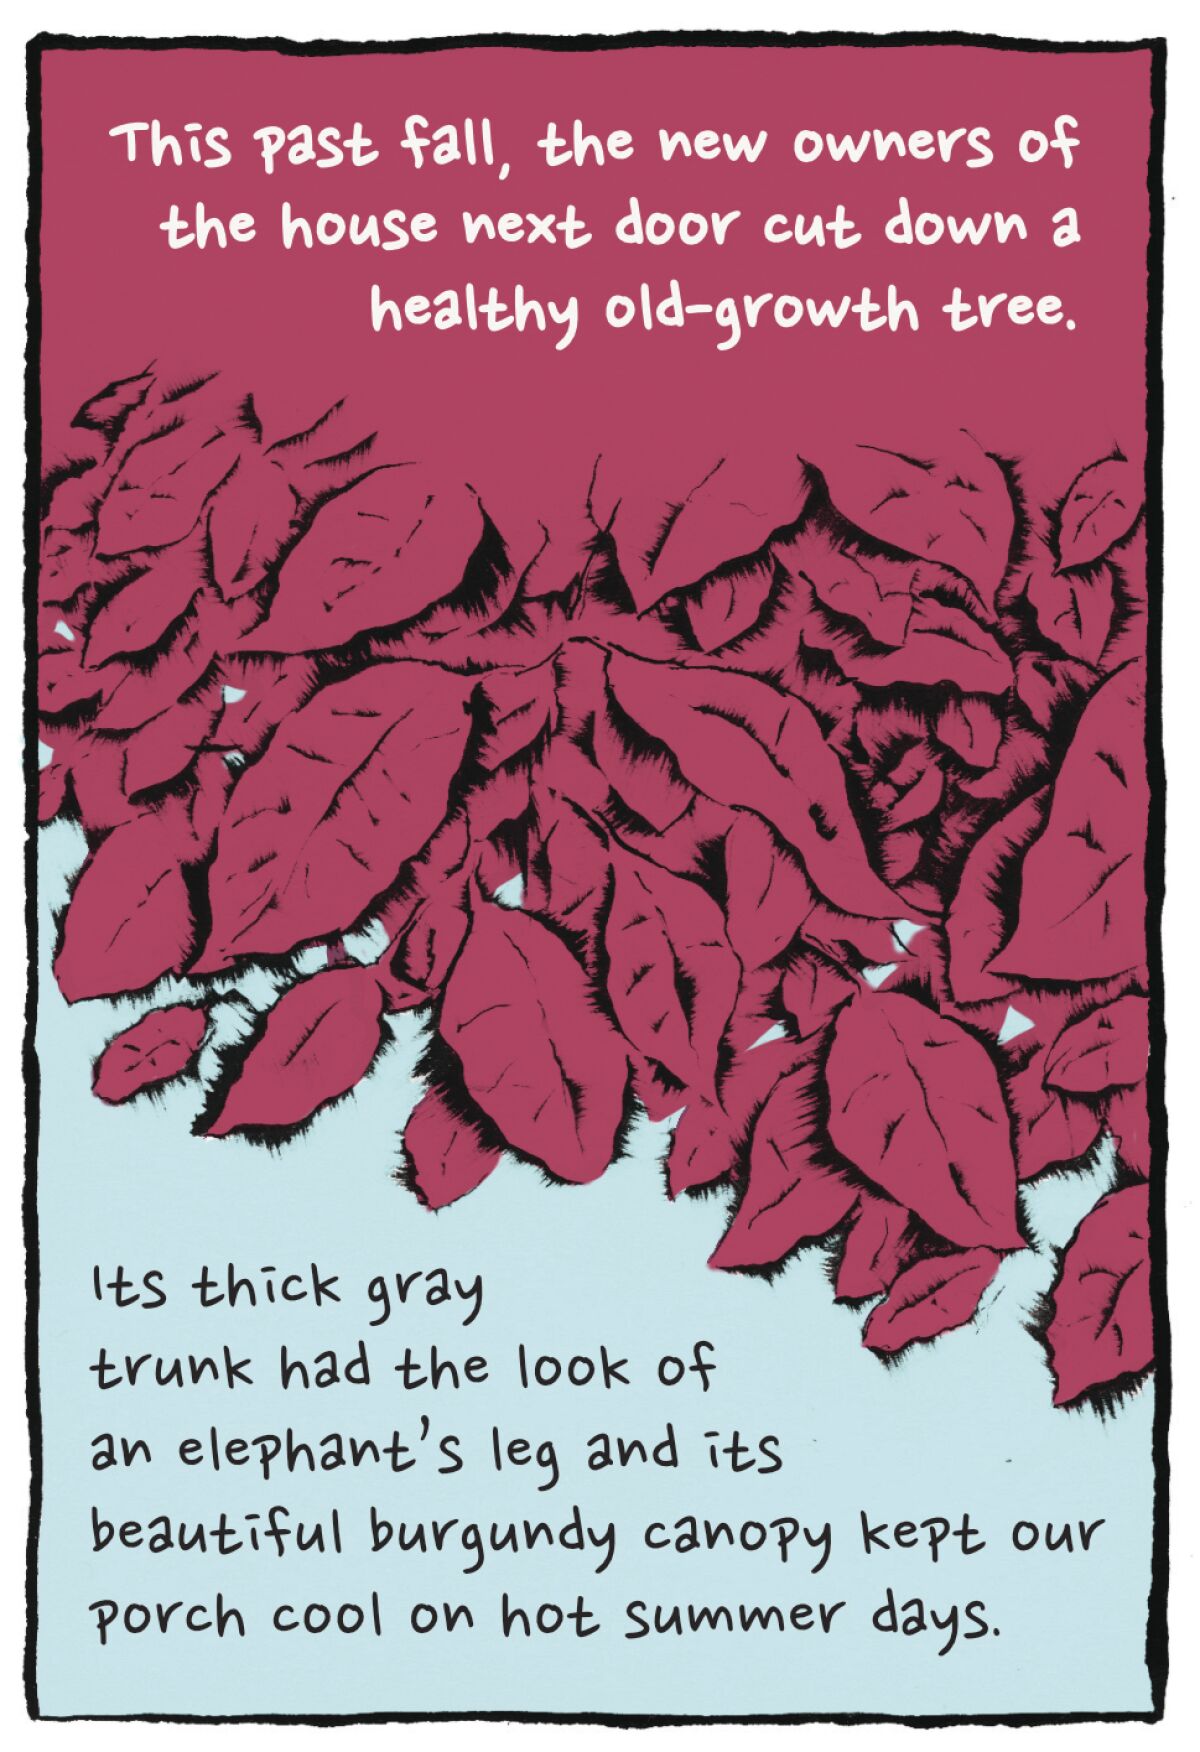 Illustration of red leaves. "This past fall, the new owners of the house next door cut down a healthy old-growth tree."